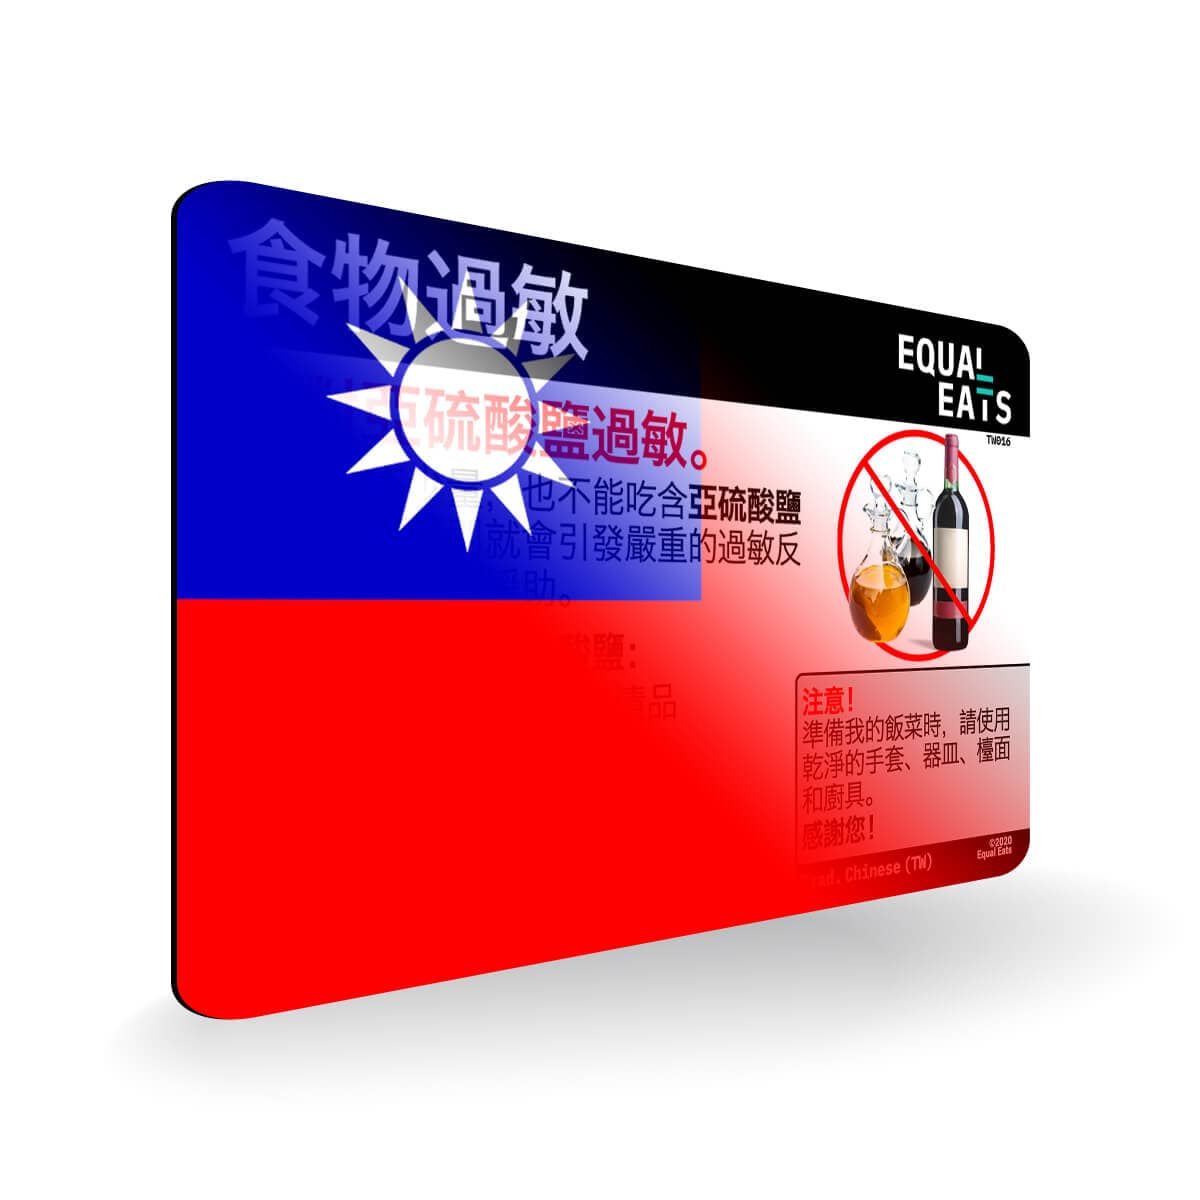 Sulfite Allergy in Traditional Chinese. Sulfite Allergy Card for Taiwan